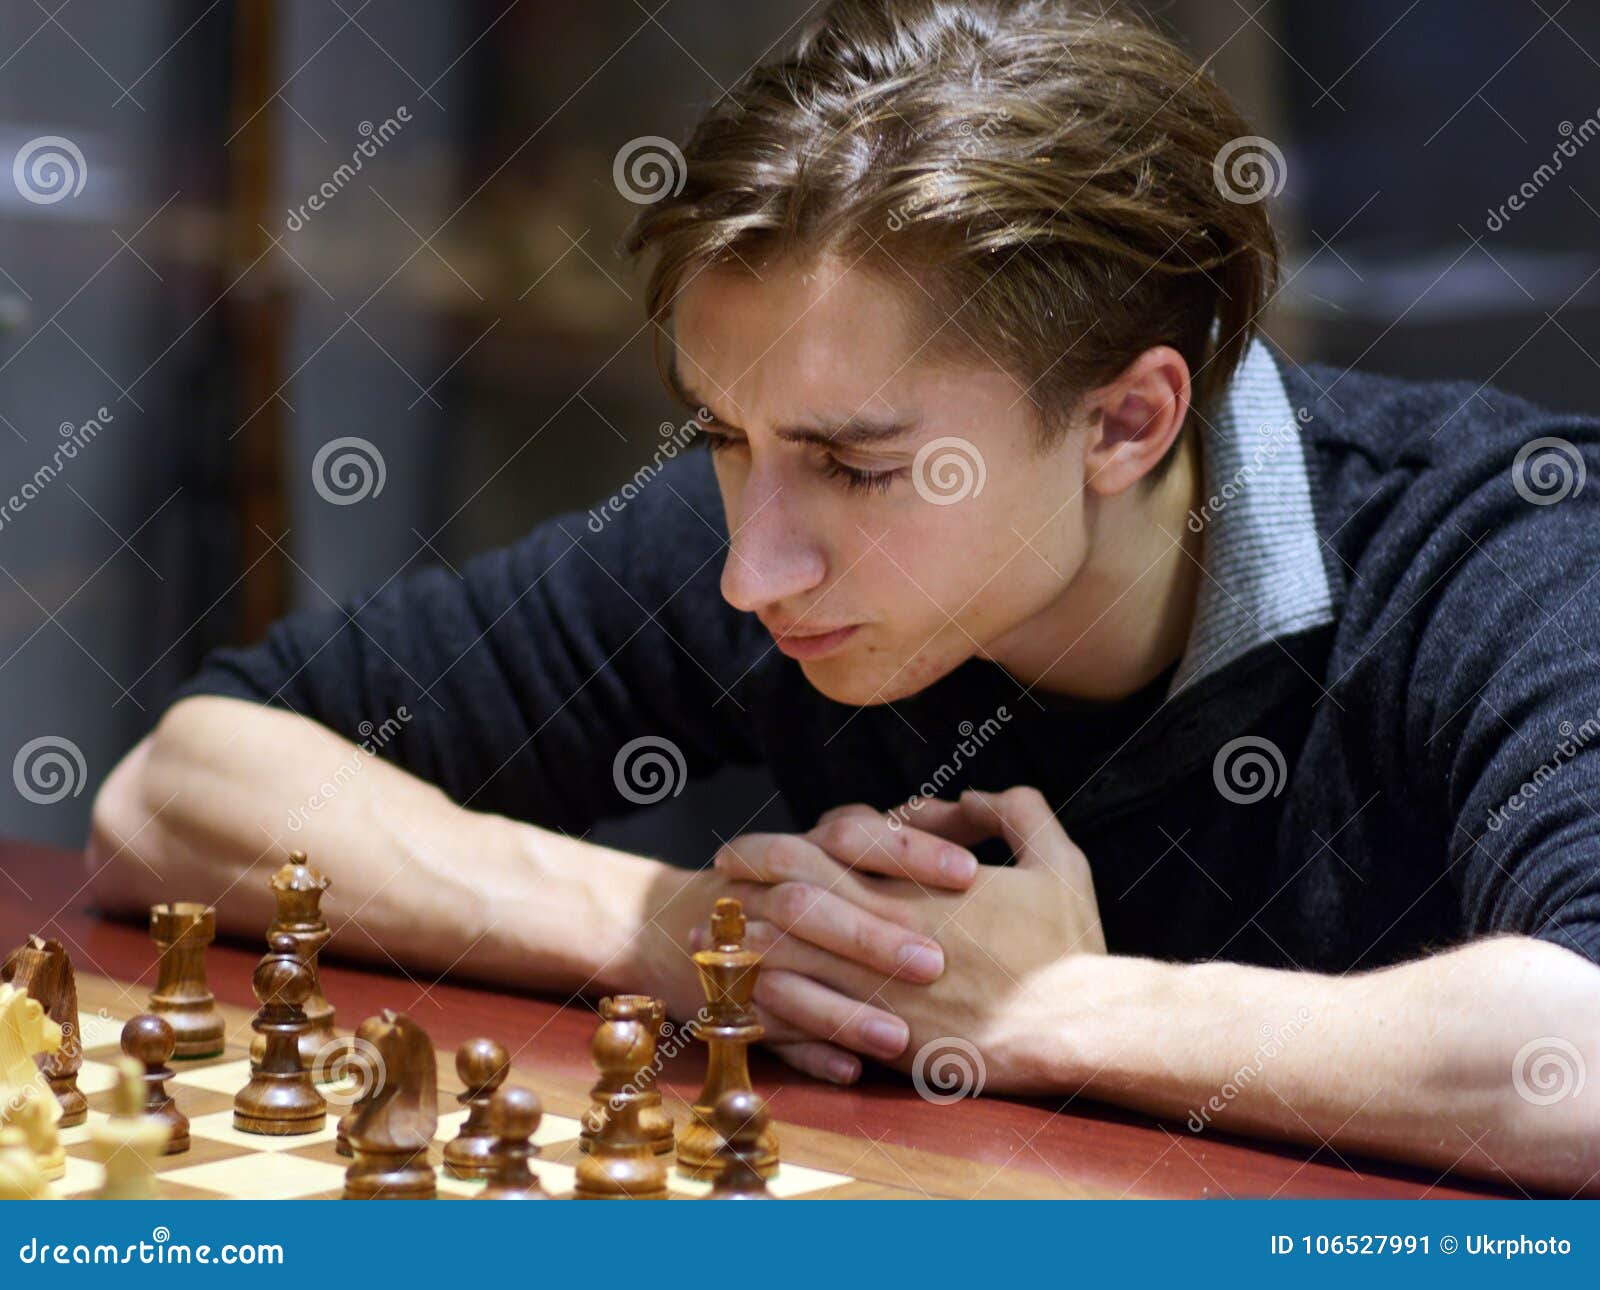 CHESS NEWS BLOG: : Sunday chess interview with talented  14-year-old GM from Russia - Daniil Dubov